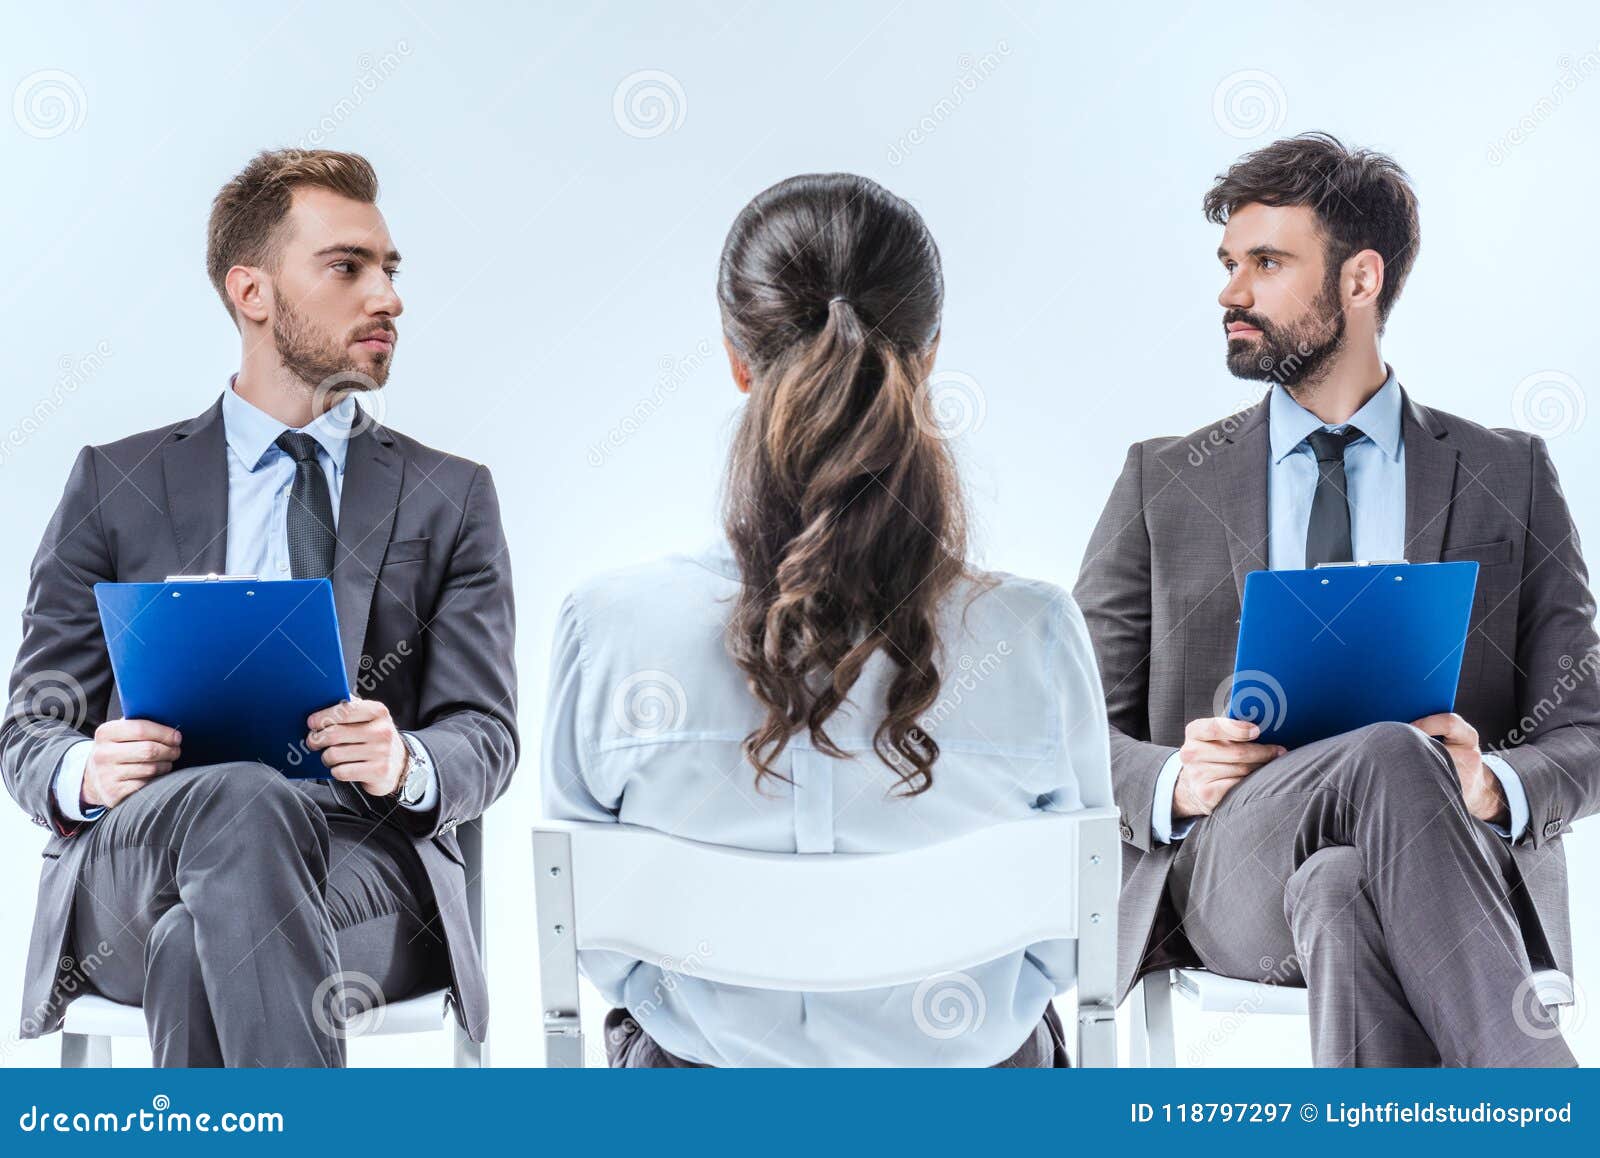 confident businessmen with clipboards looking at each other during